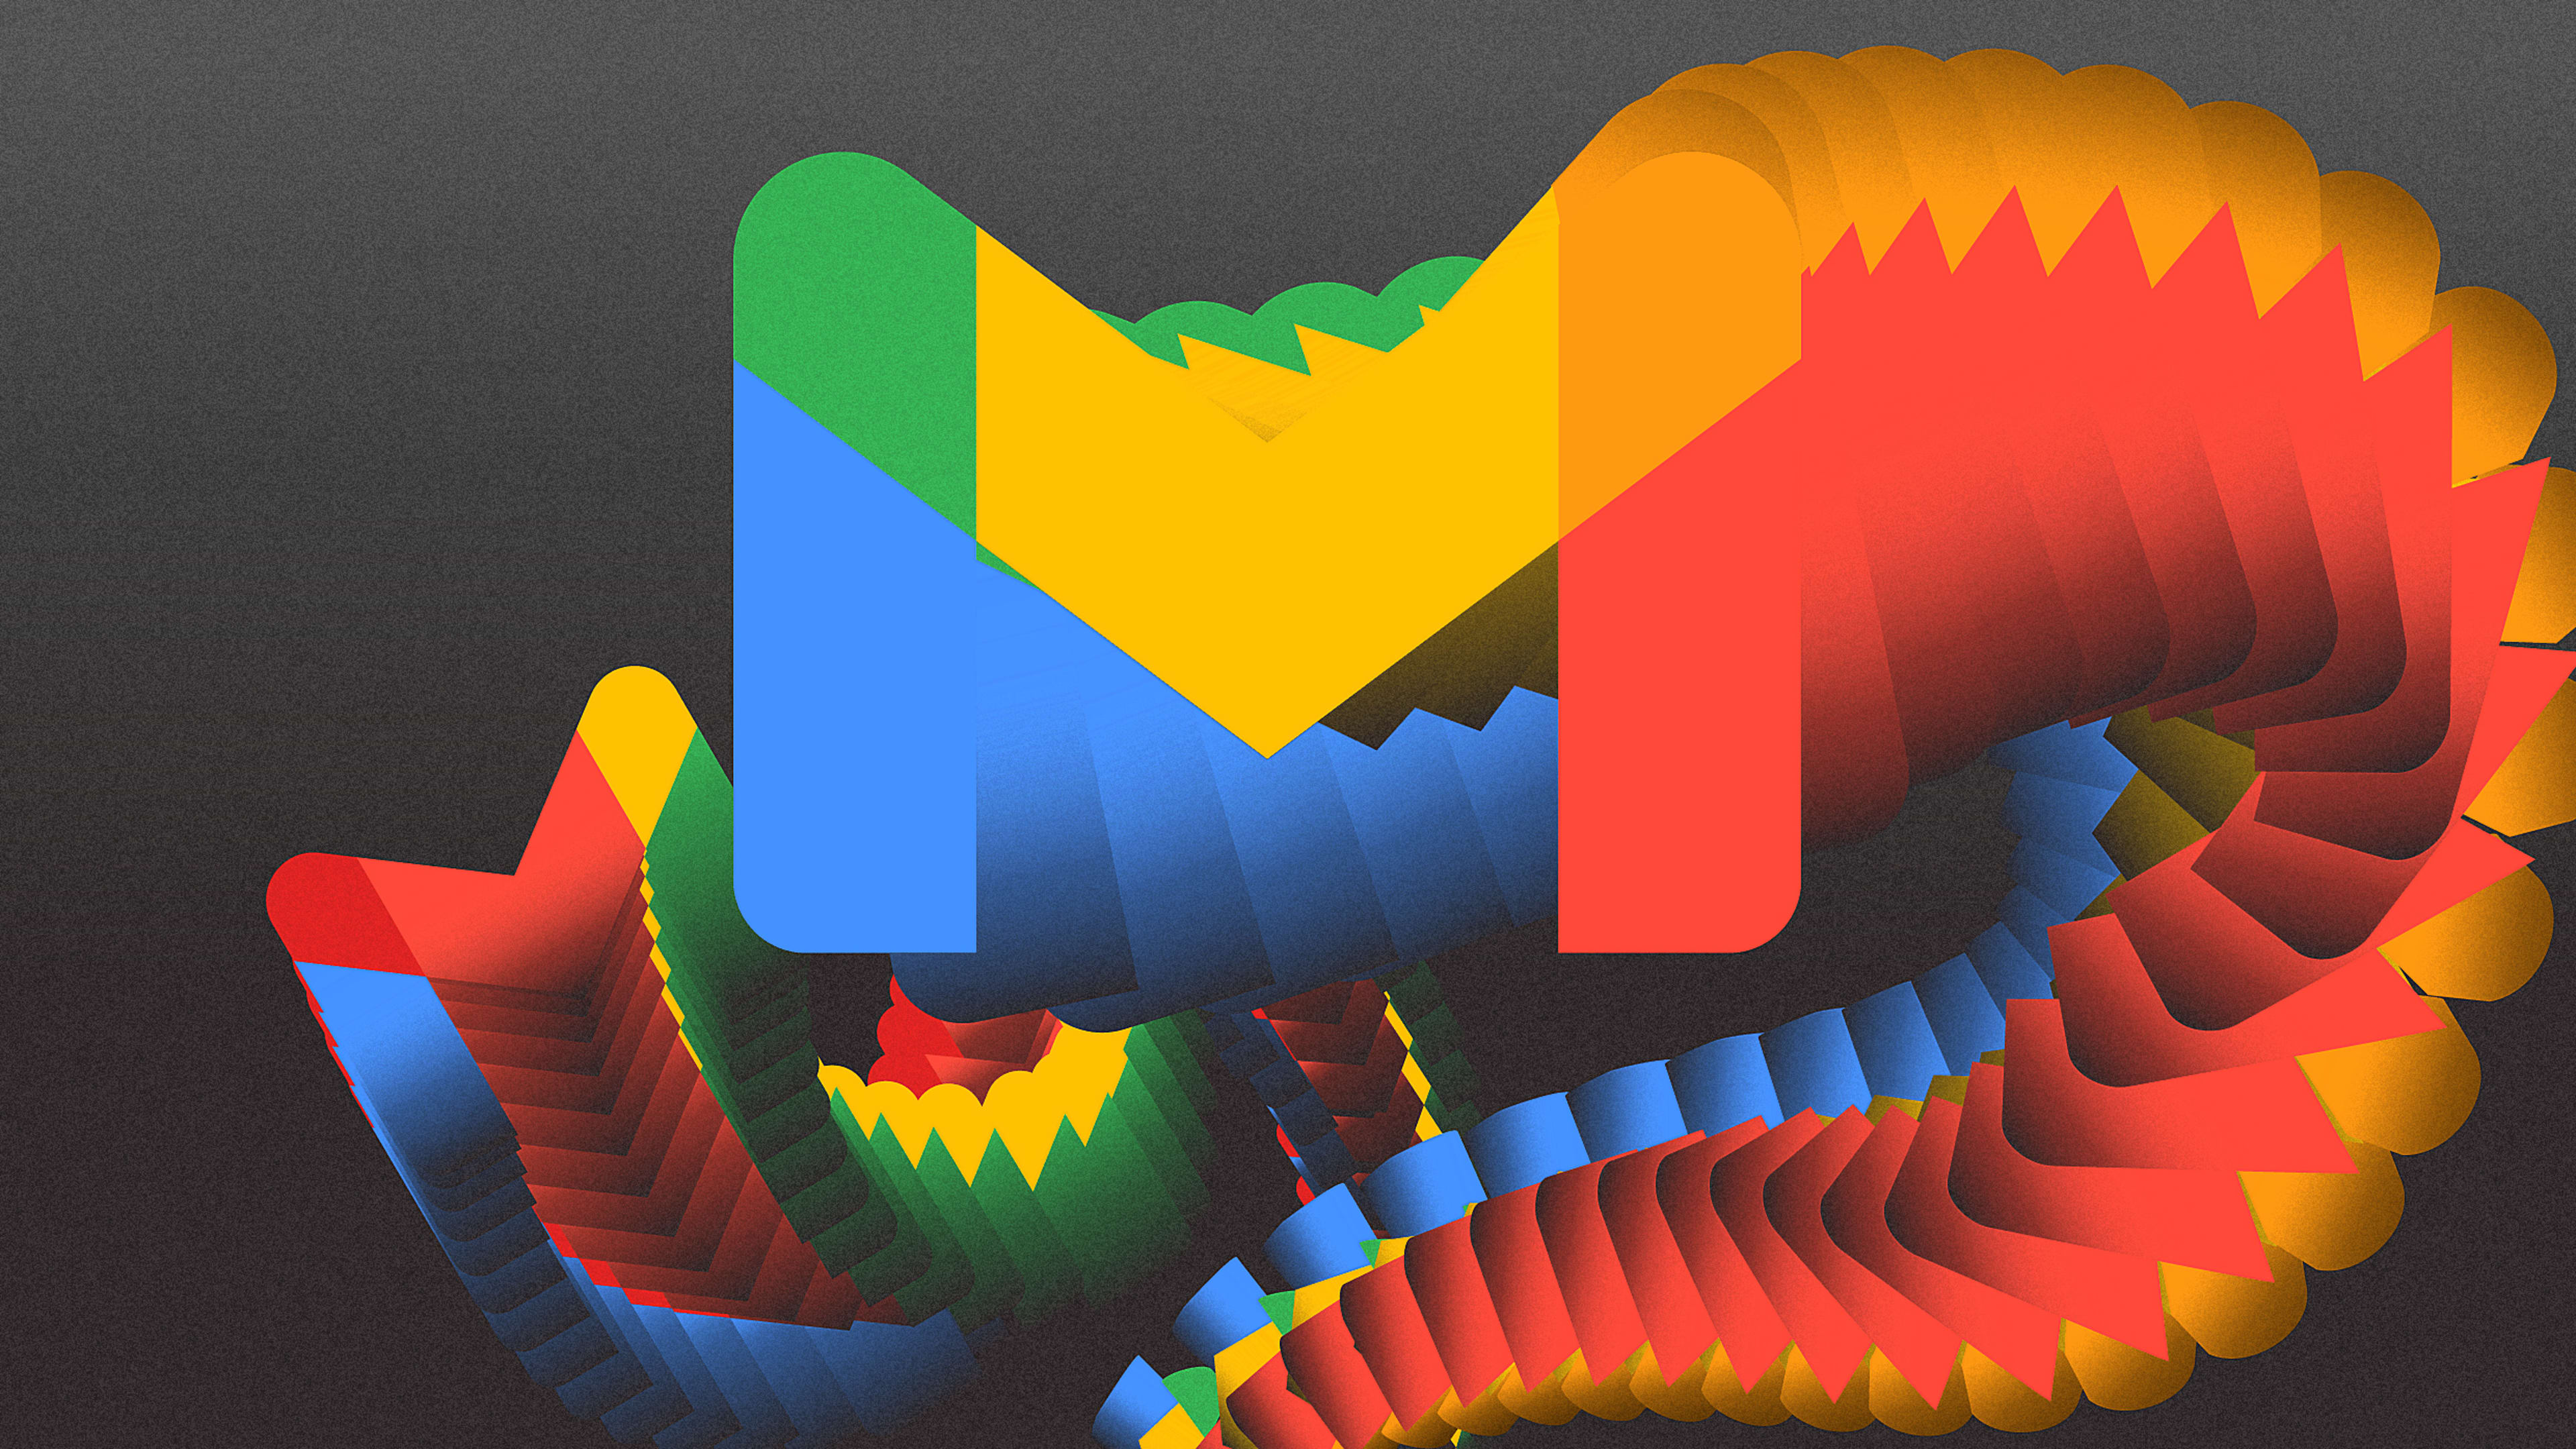 Gmail’s new logo is a mess. This amateur designer fixed it